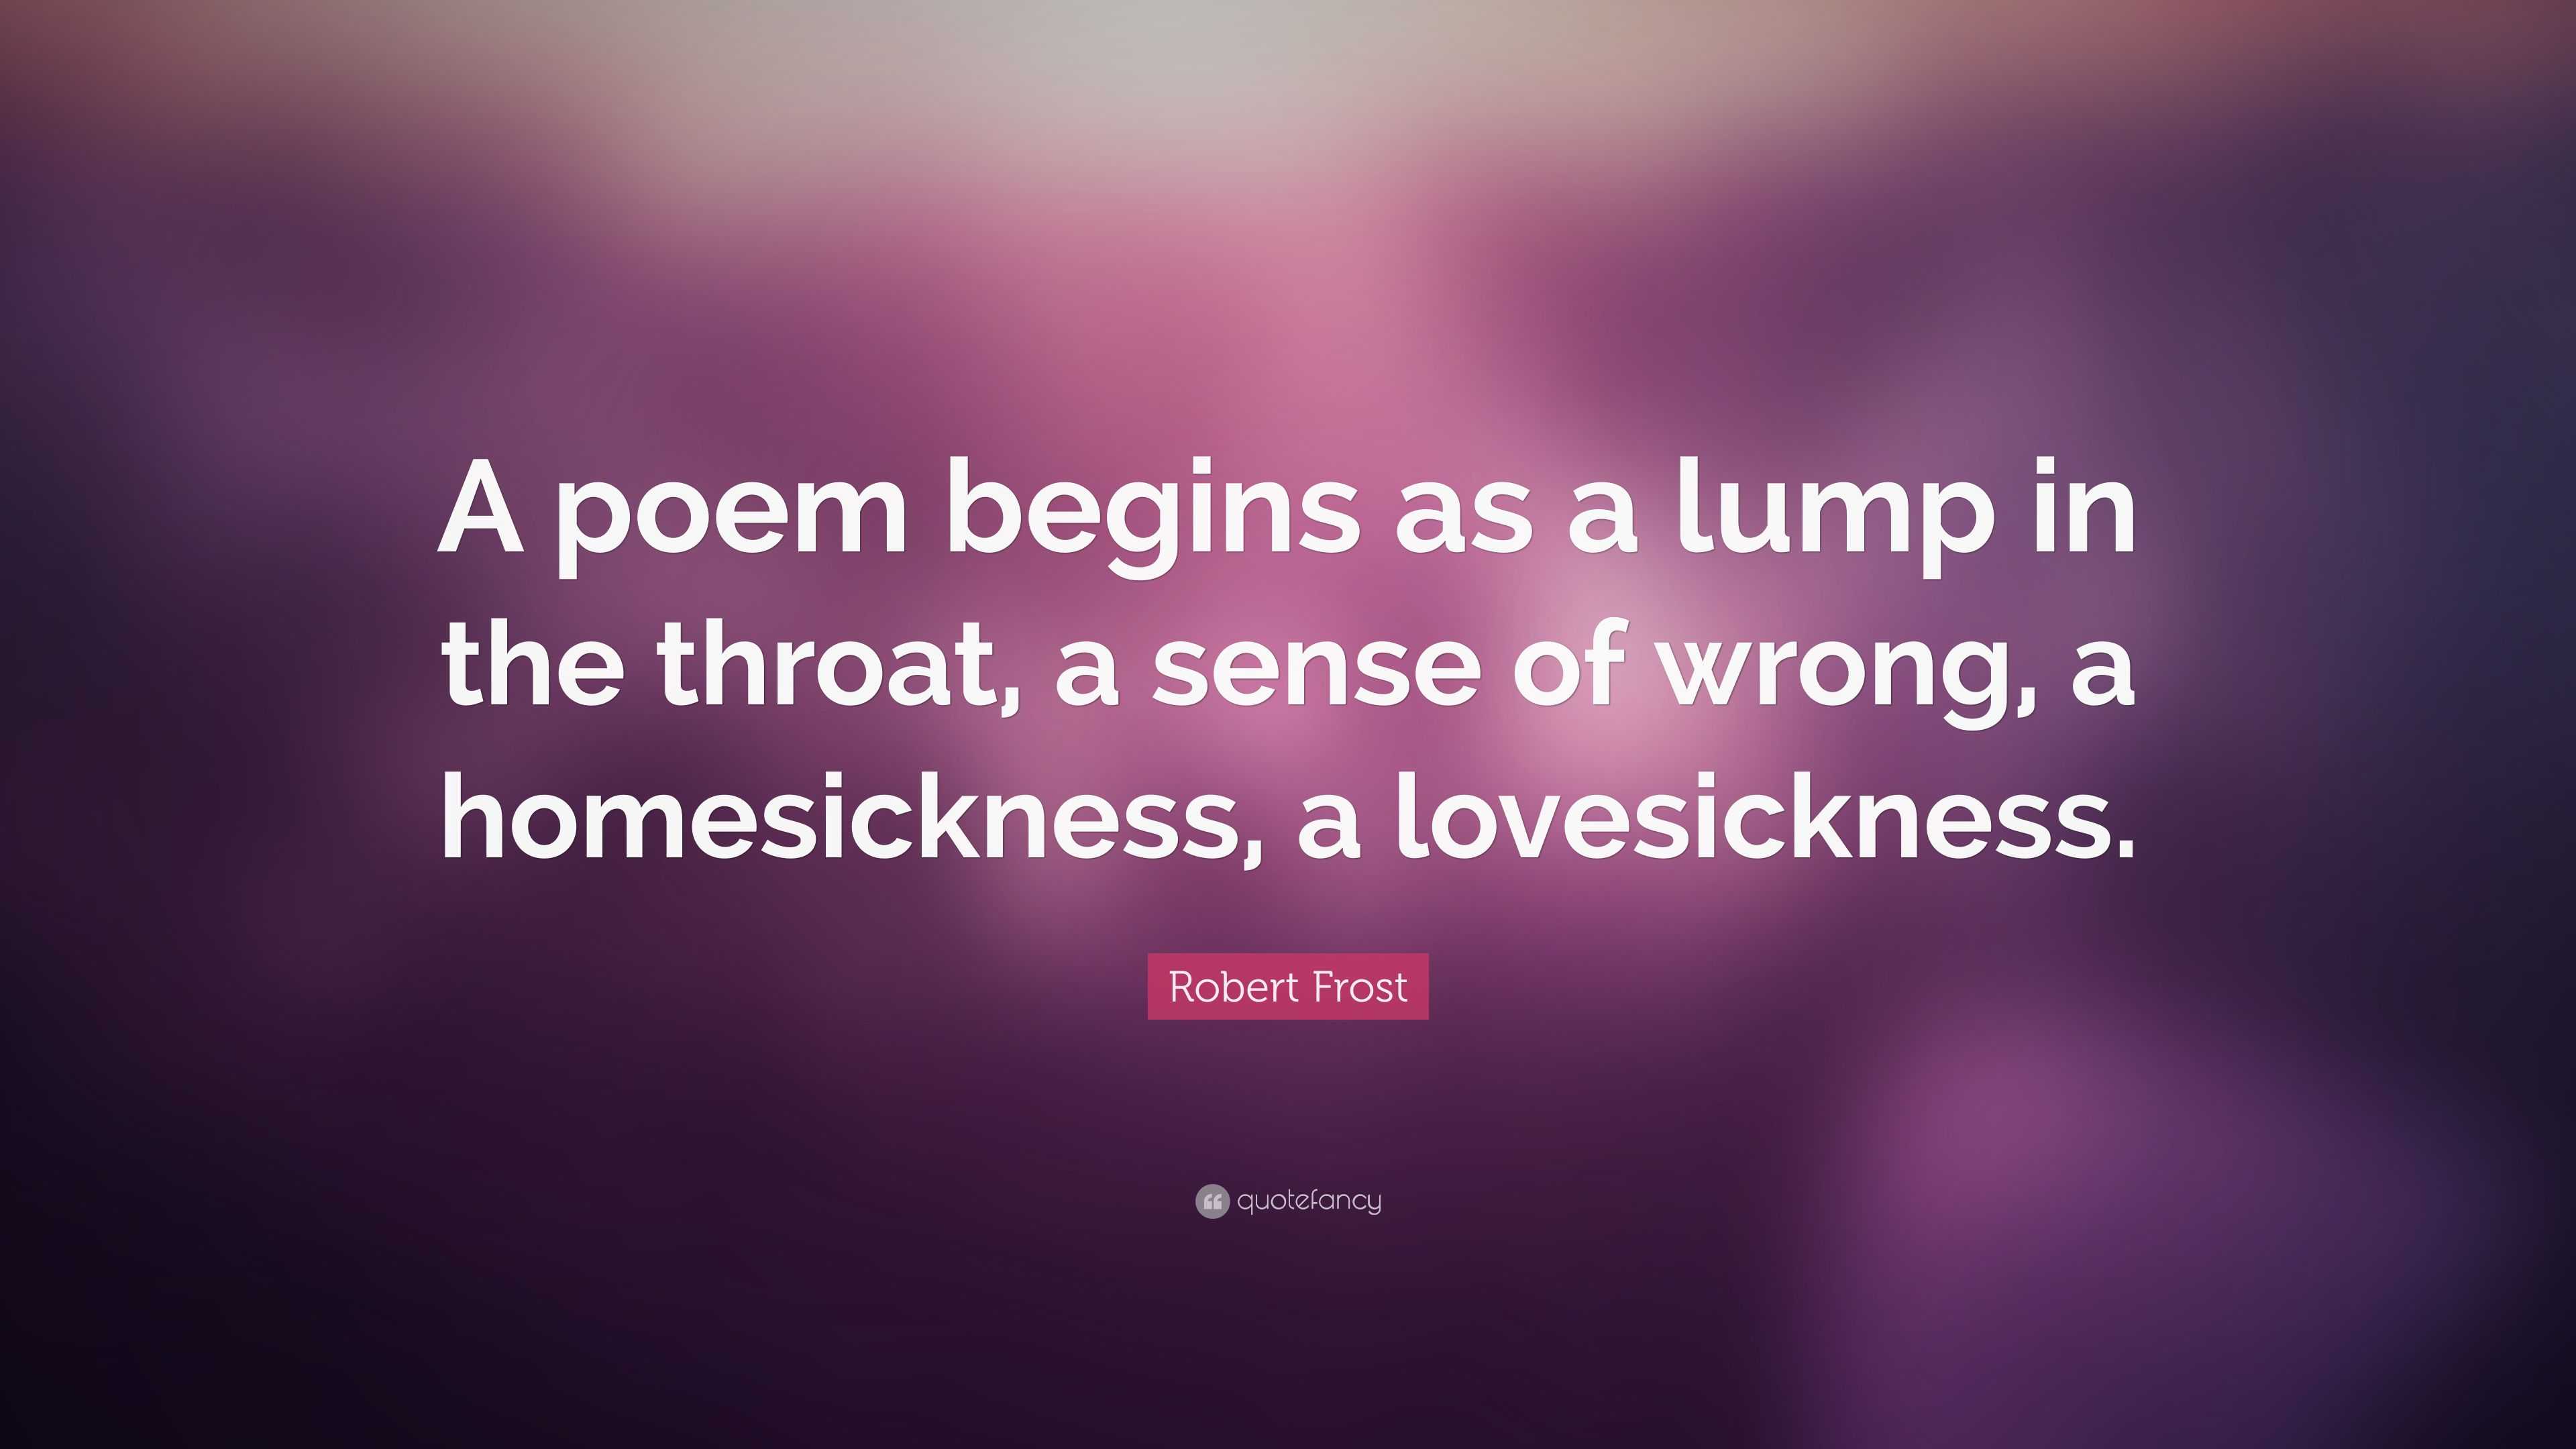 Robert Frost Quote: “A poem begins as a lump in the throat, a sense of ...